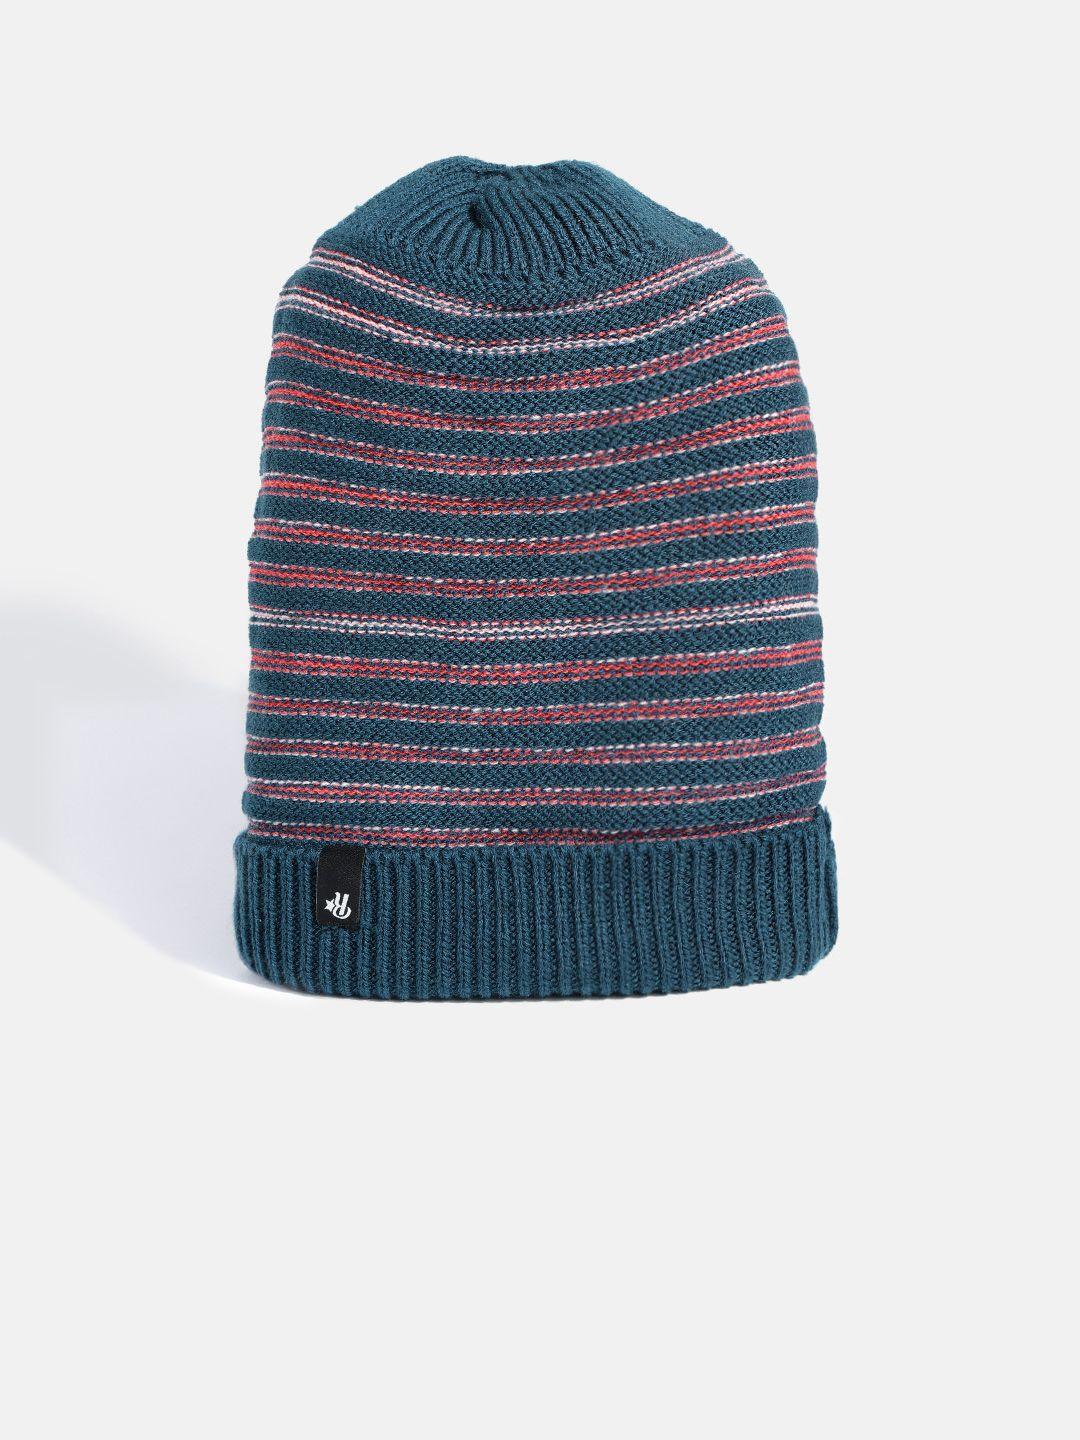 the roadster lifestyle co unisex teal green & pink striped beanie